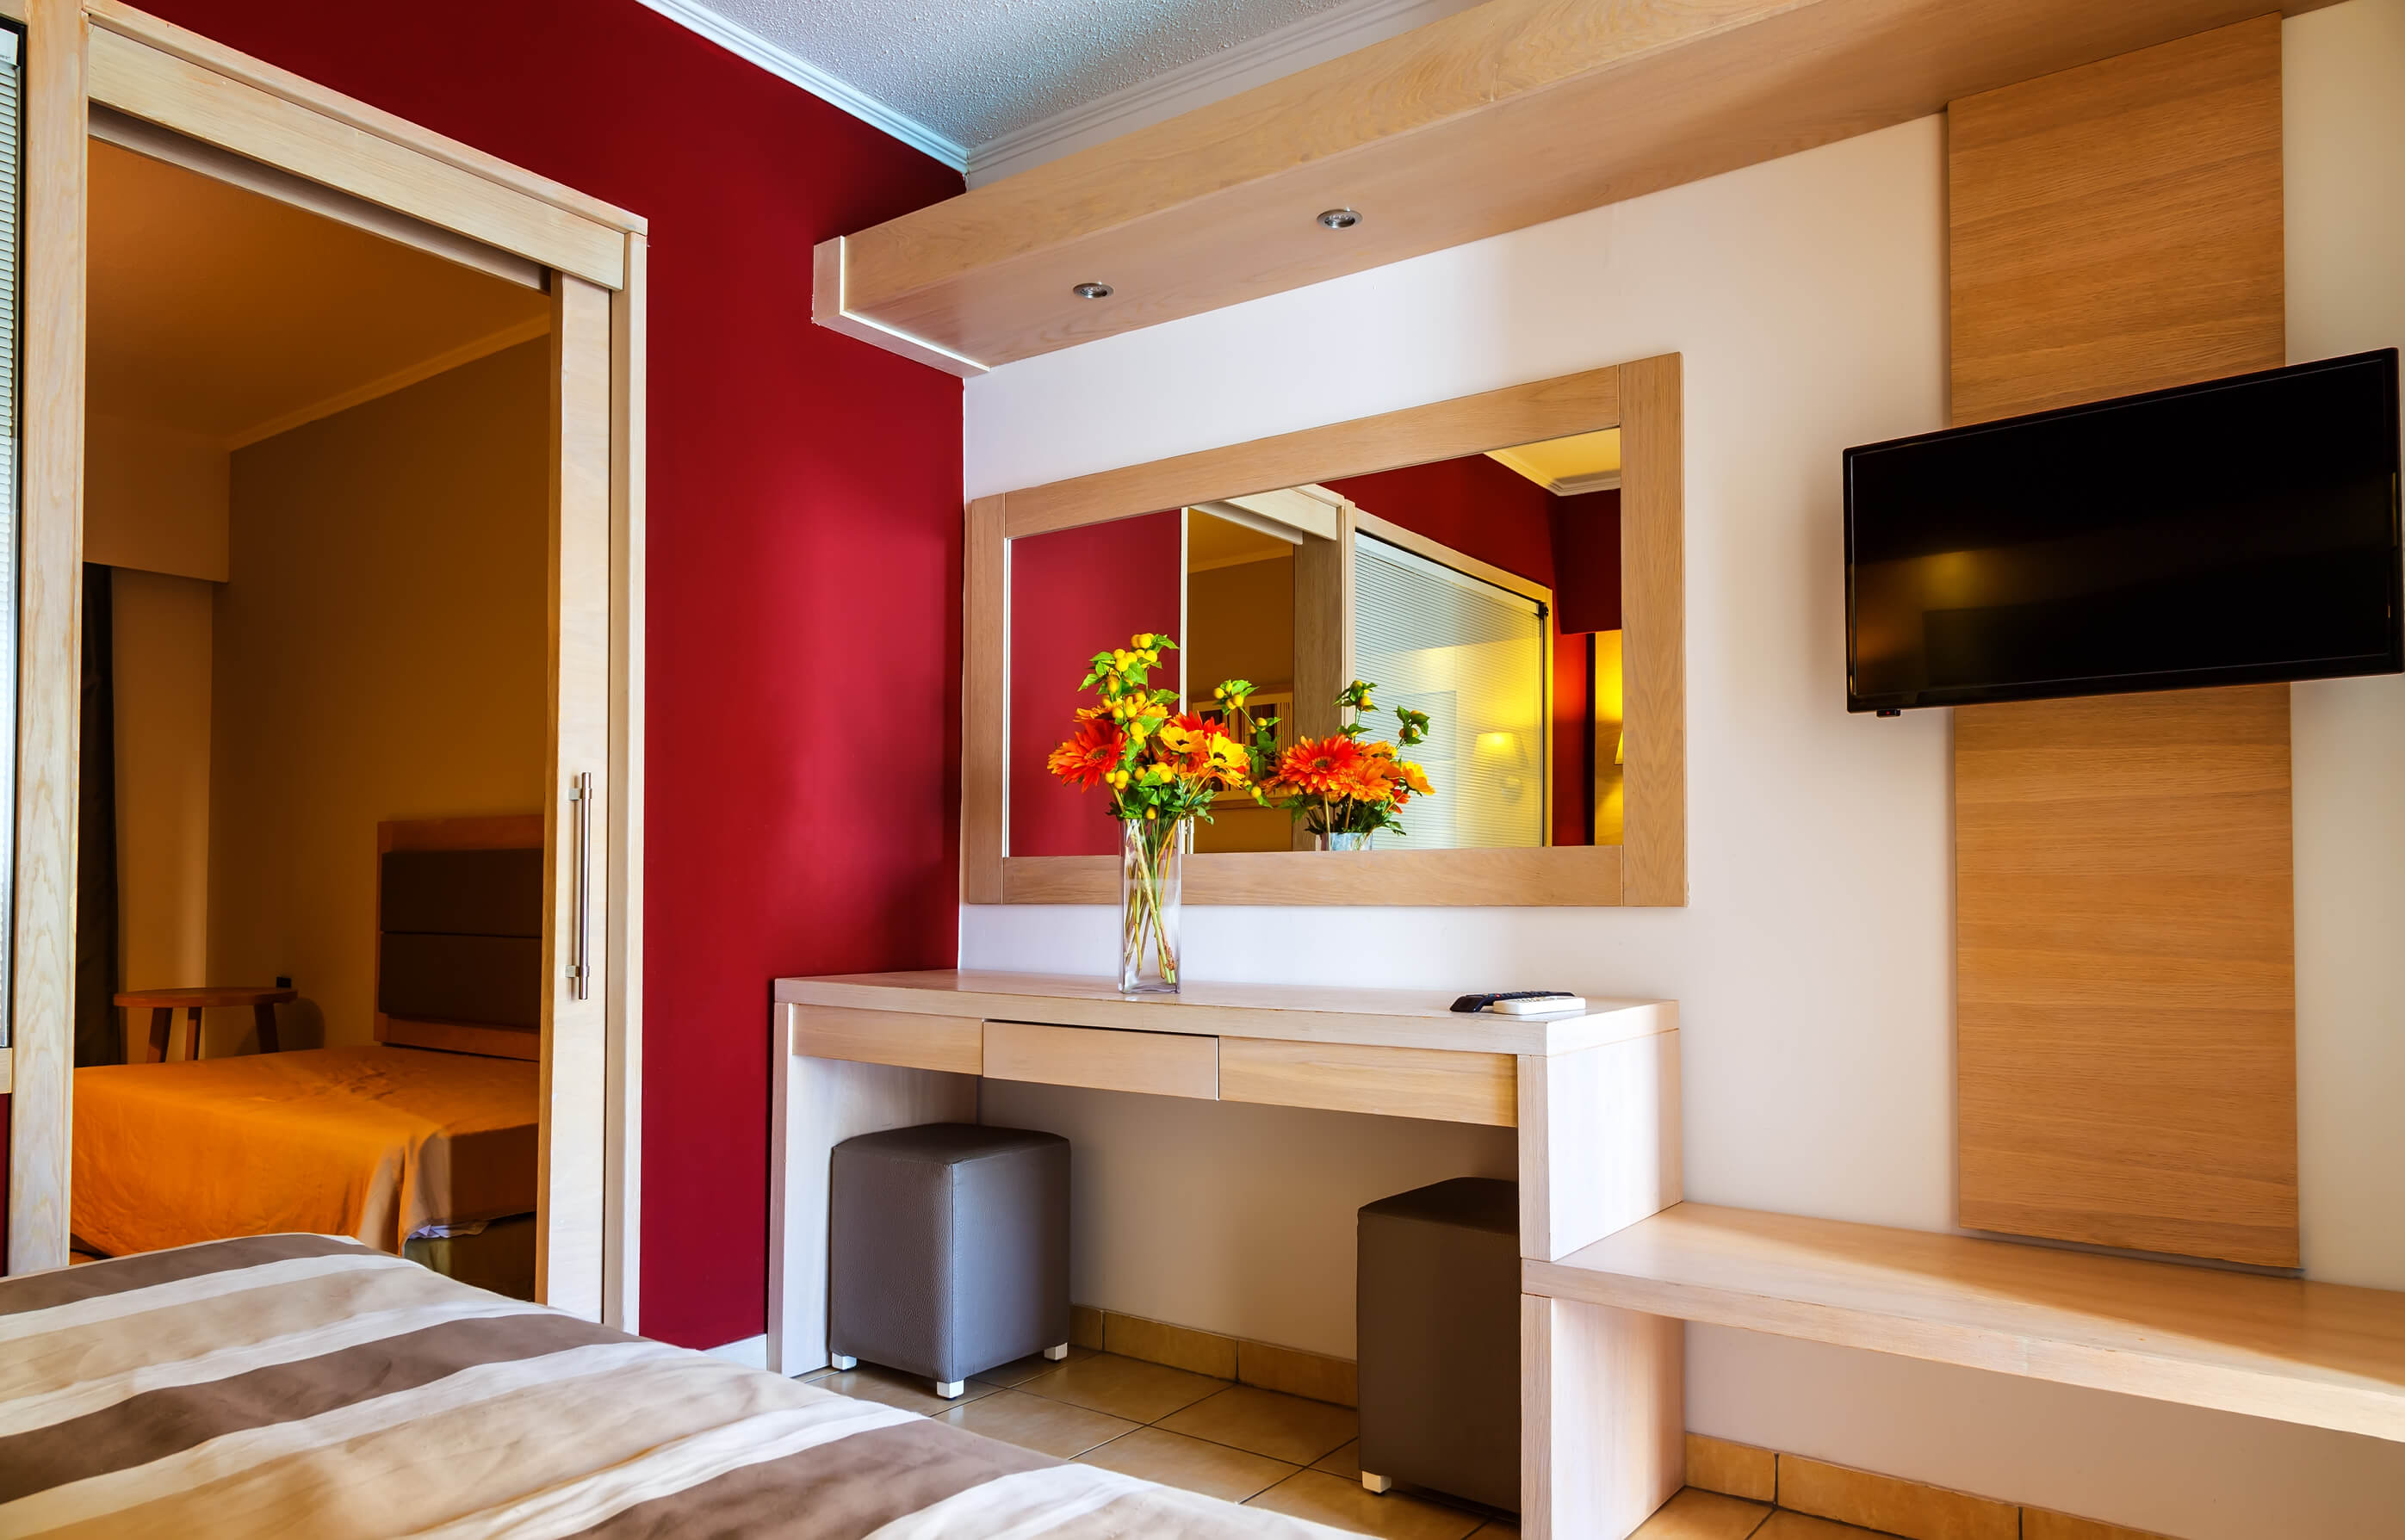 Luxury modern hotel room interior details. mirror and vase of flowers on the table.